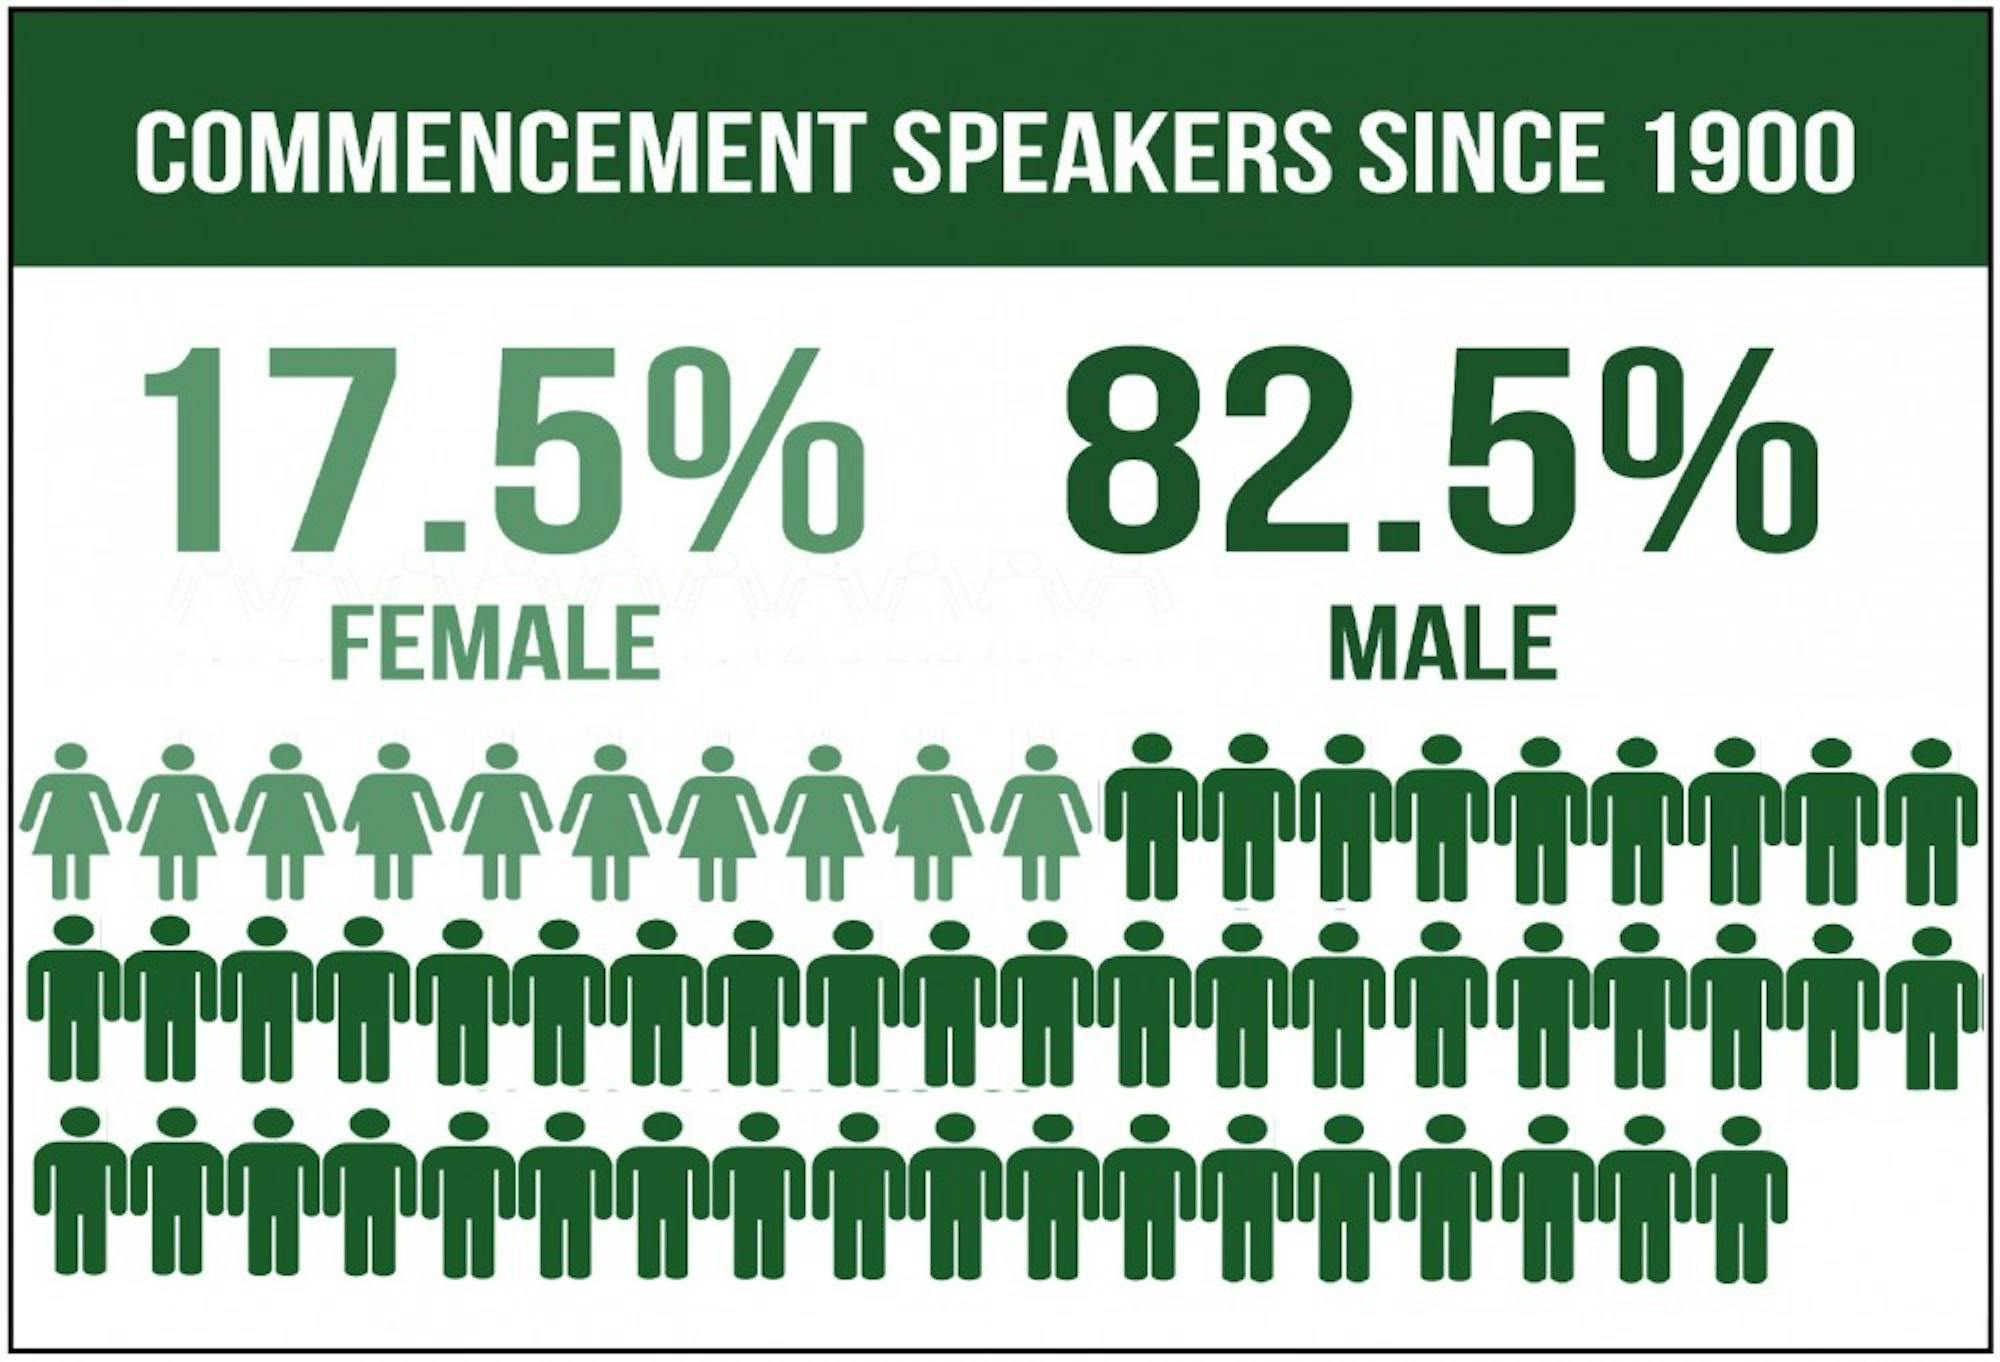 Only 10 women have addressed graduates at commencement since 1900.